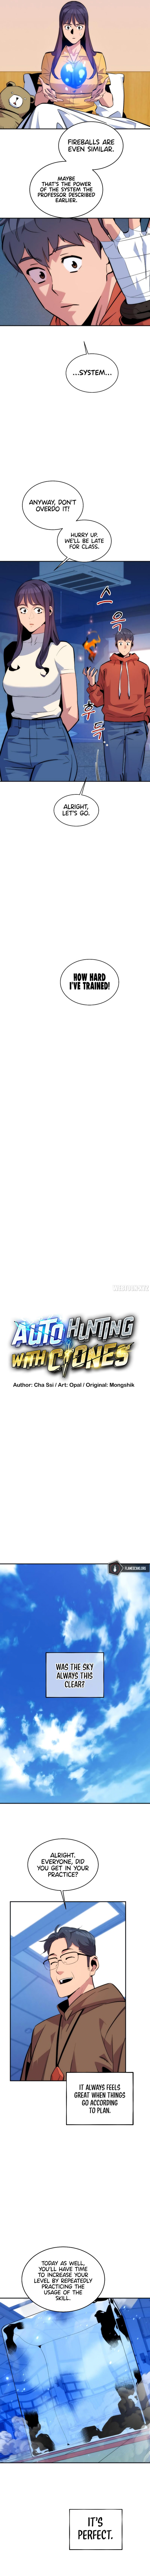 auto-hunting-with-clones-chap-54-2